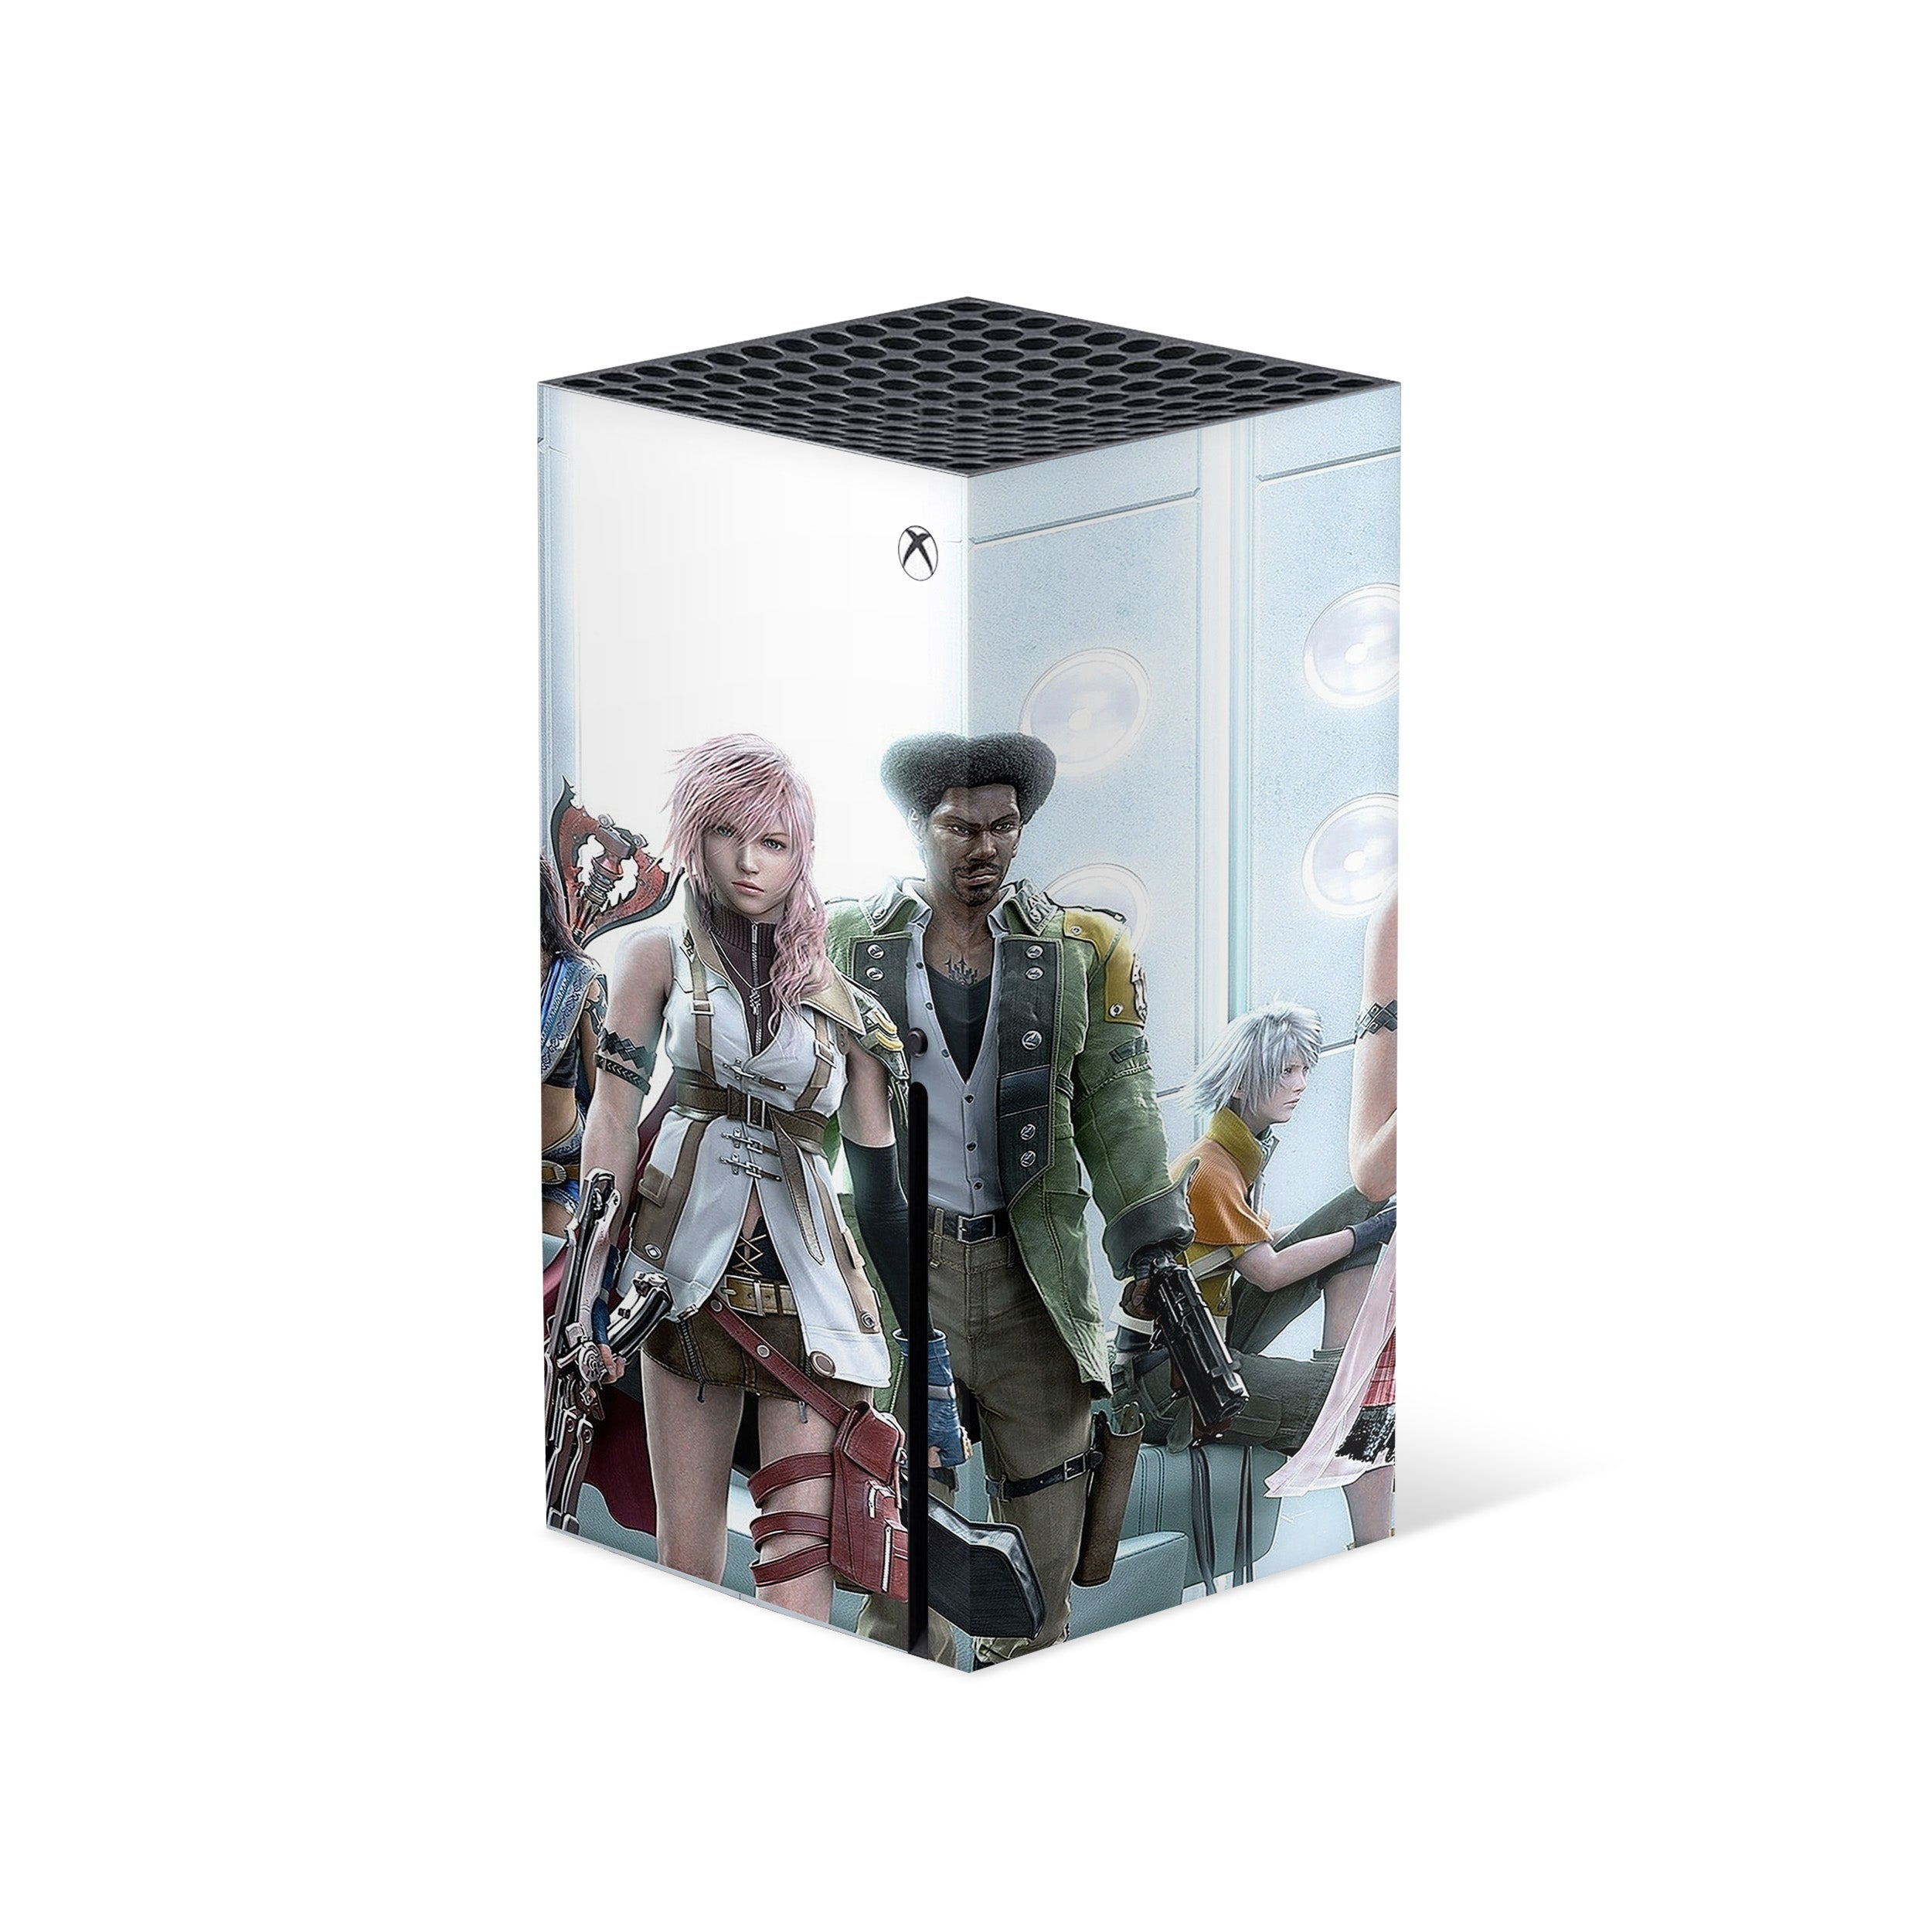 A video game skin featuring a Final Fantasy 13 Squad design for the Xbox Series X.